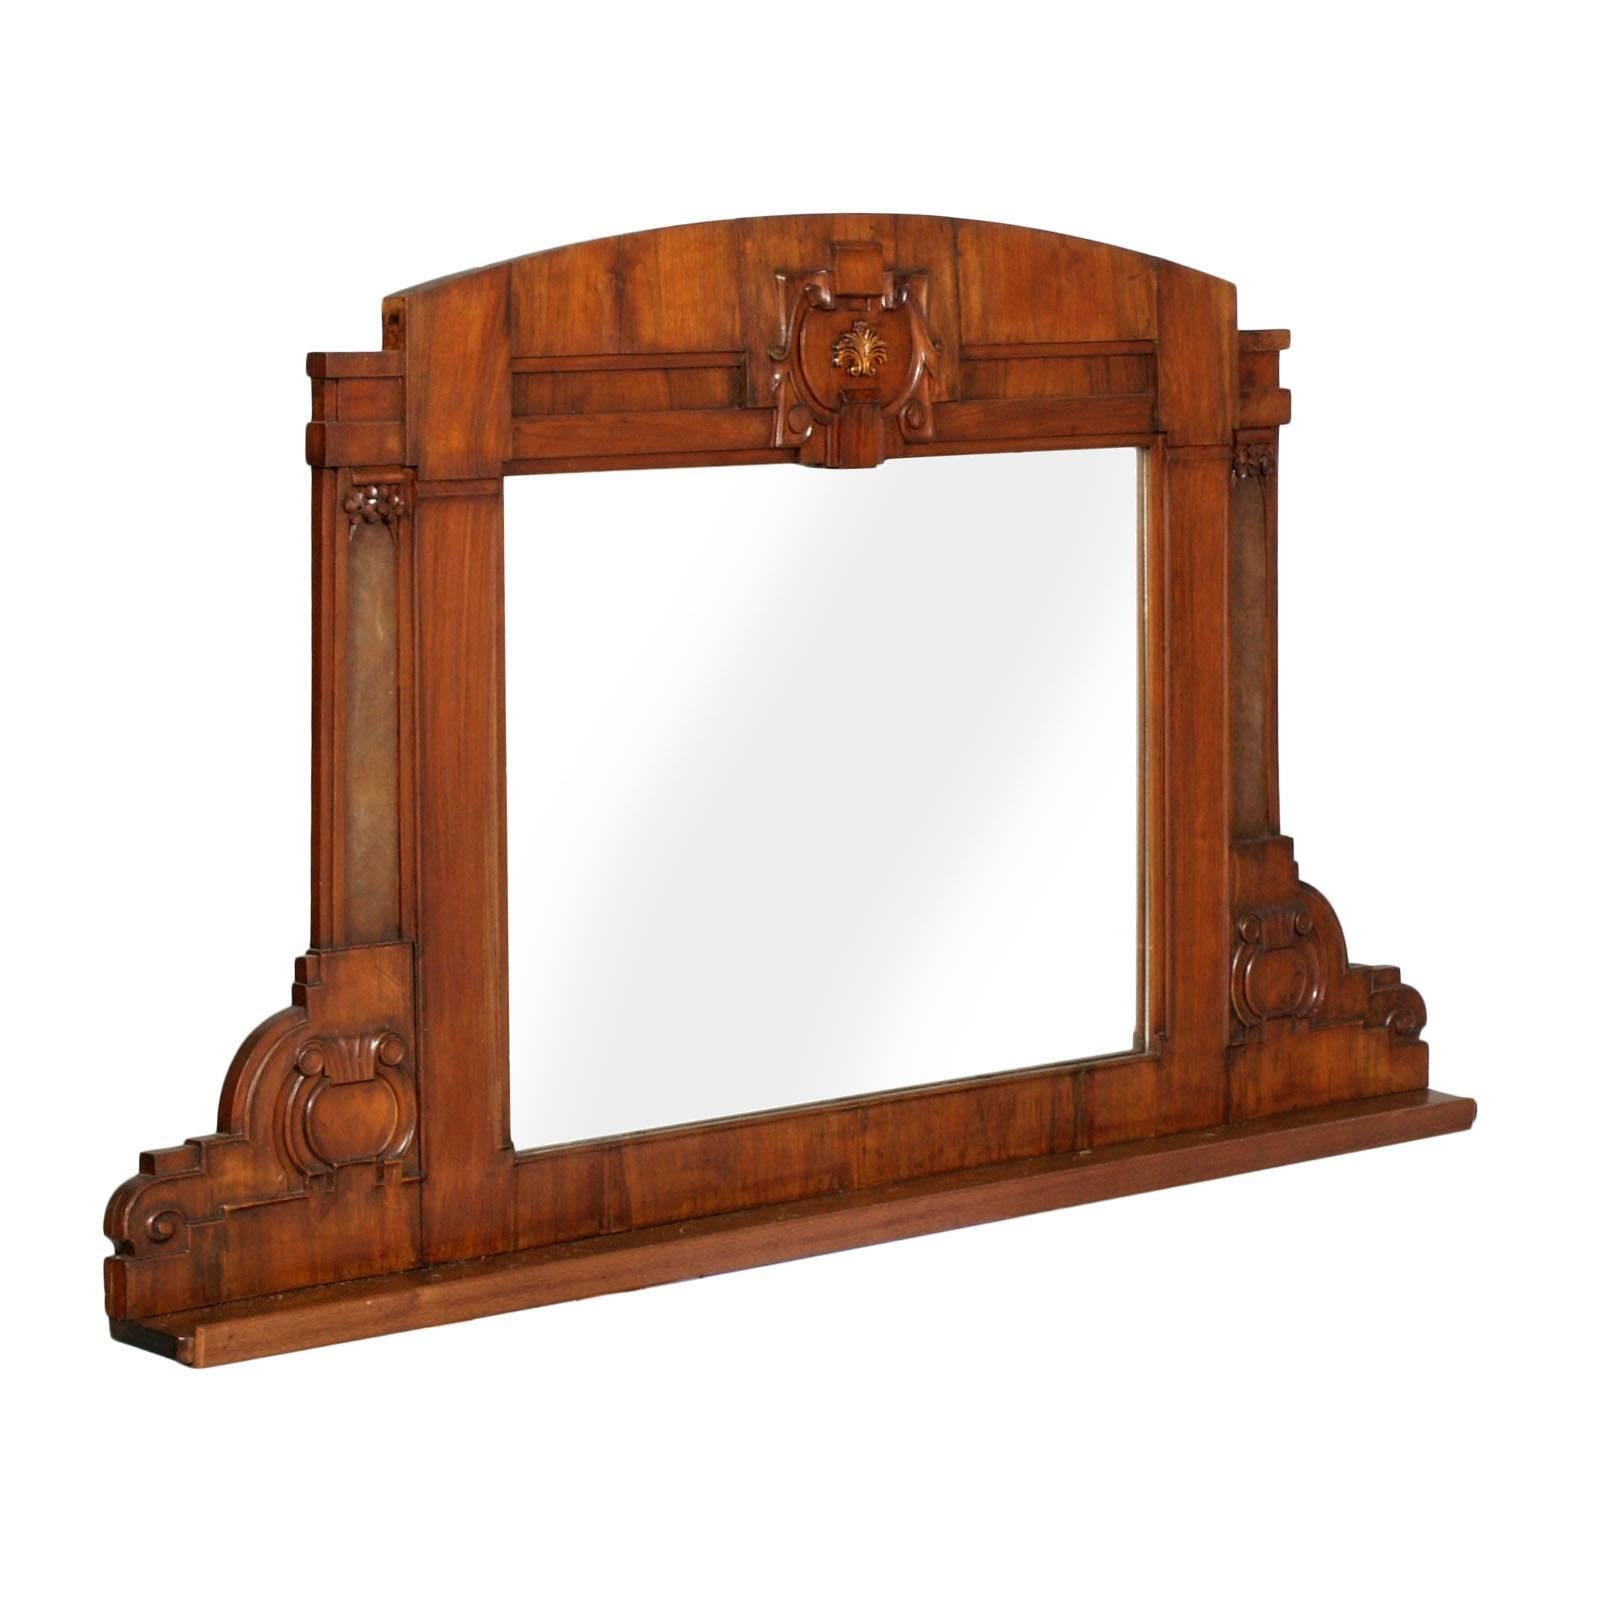 Mid-19th Century Neoclassic Wall Mirror or Fireplace, Hand-Carved Walnut For Sale